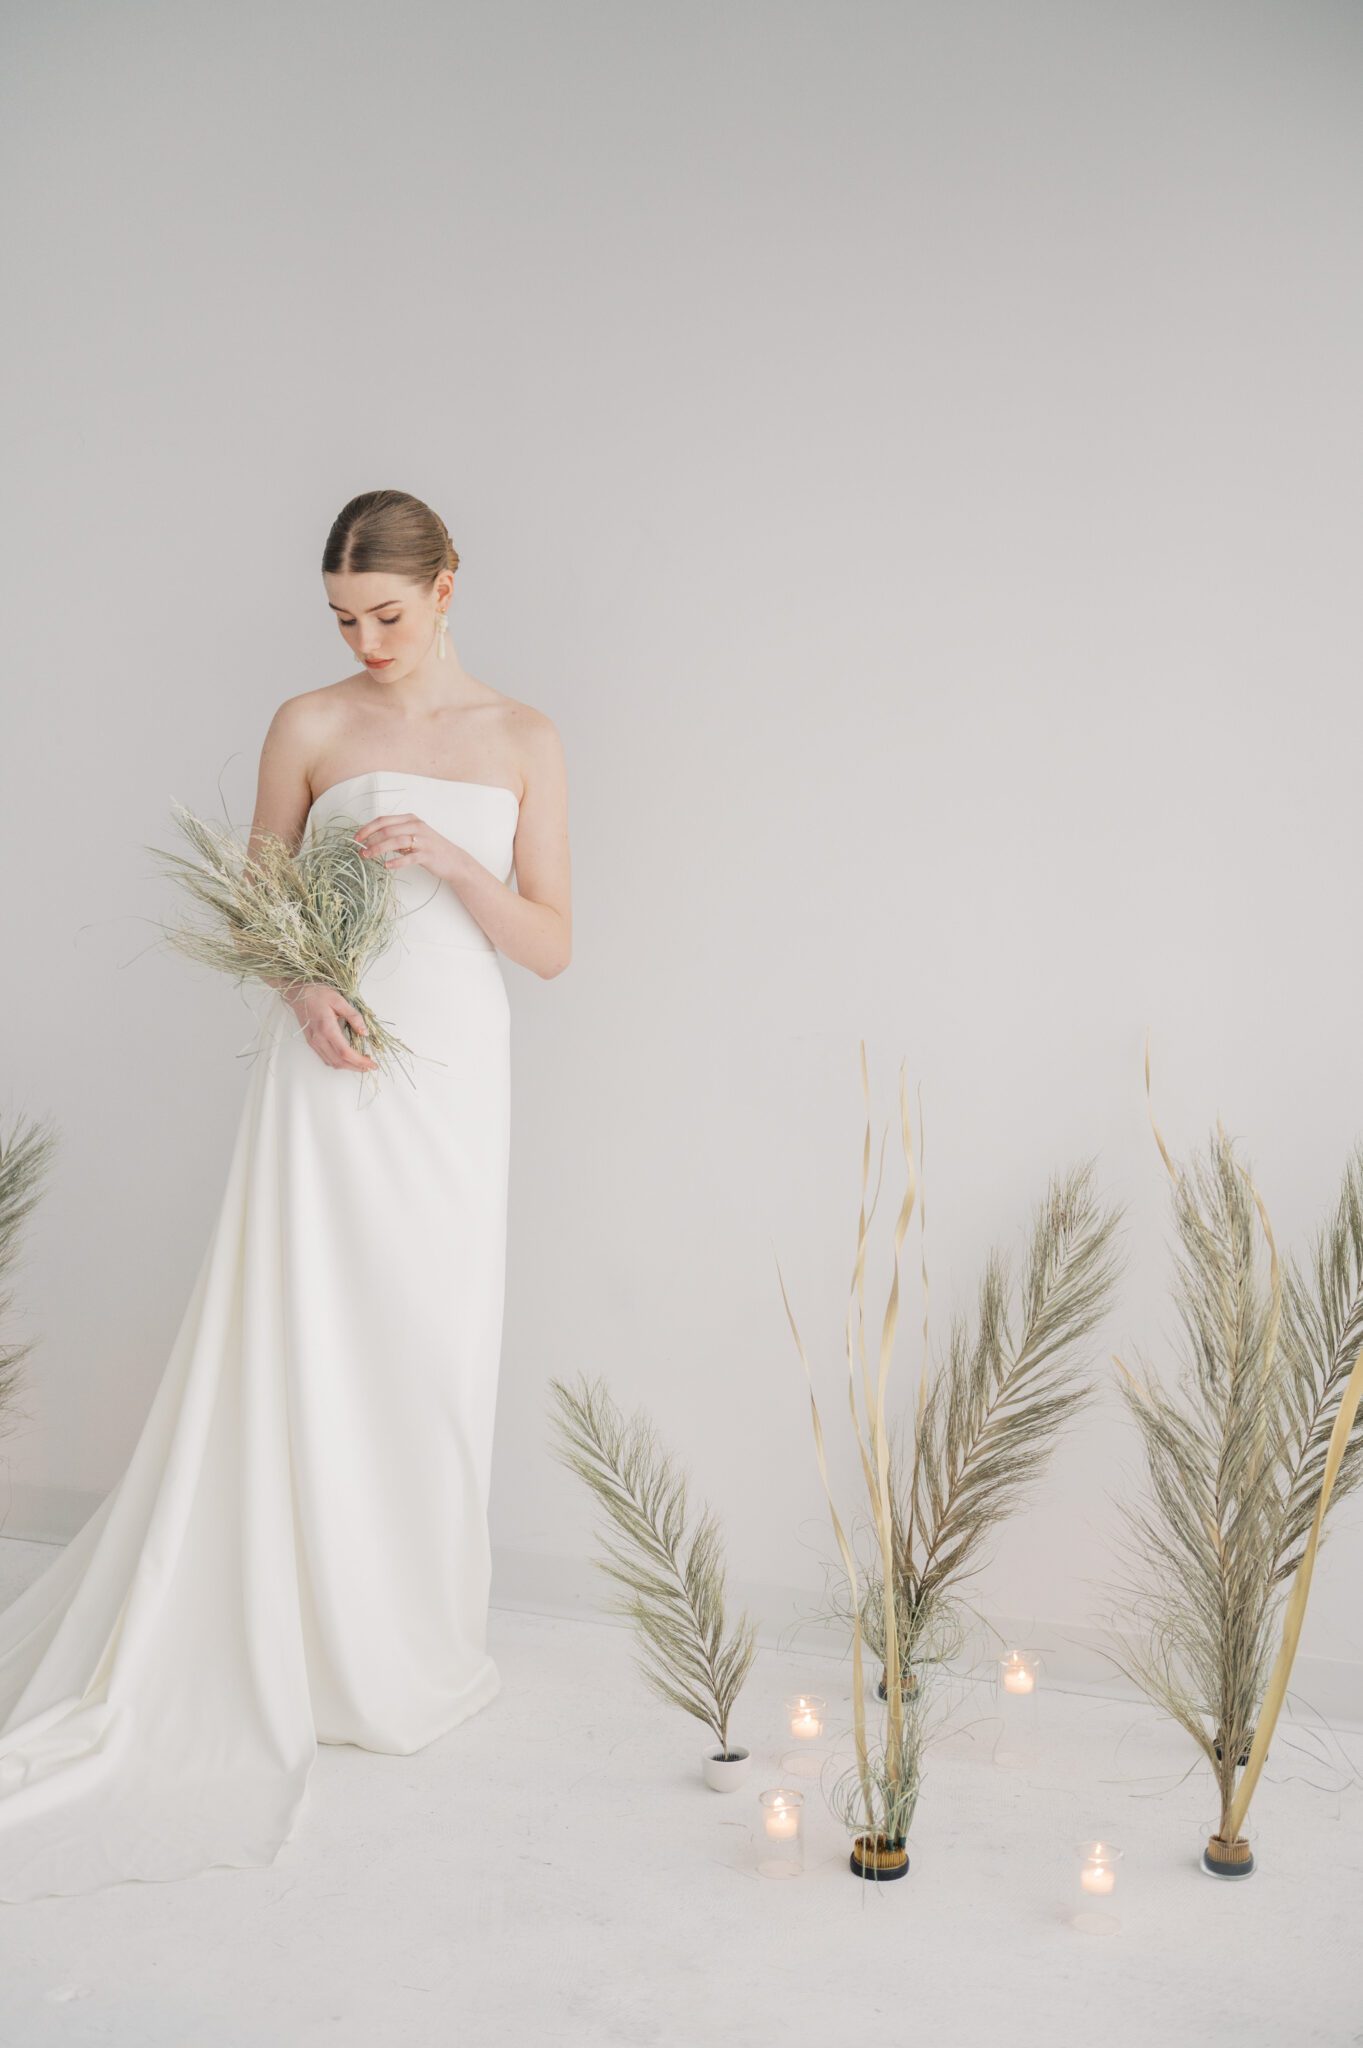 Grecian style wedding gown by Aesling: a fashionable choice for modern brides, Artful florals and nature-inspired textures for contemporary weddings